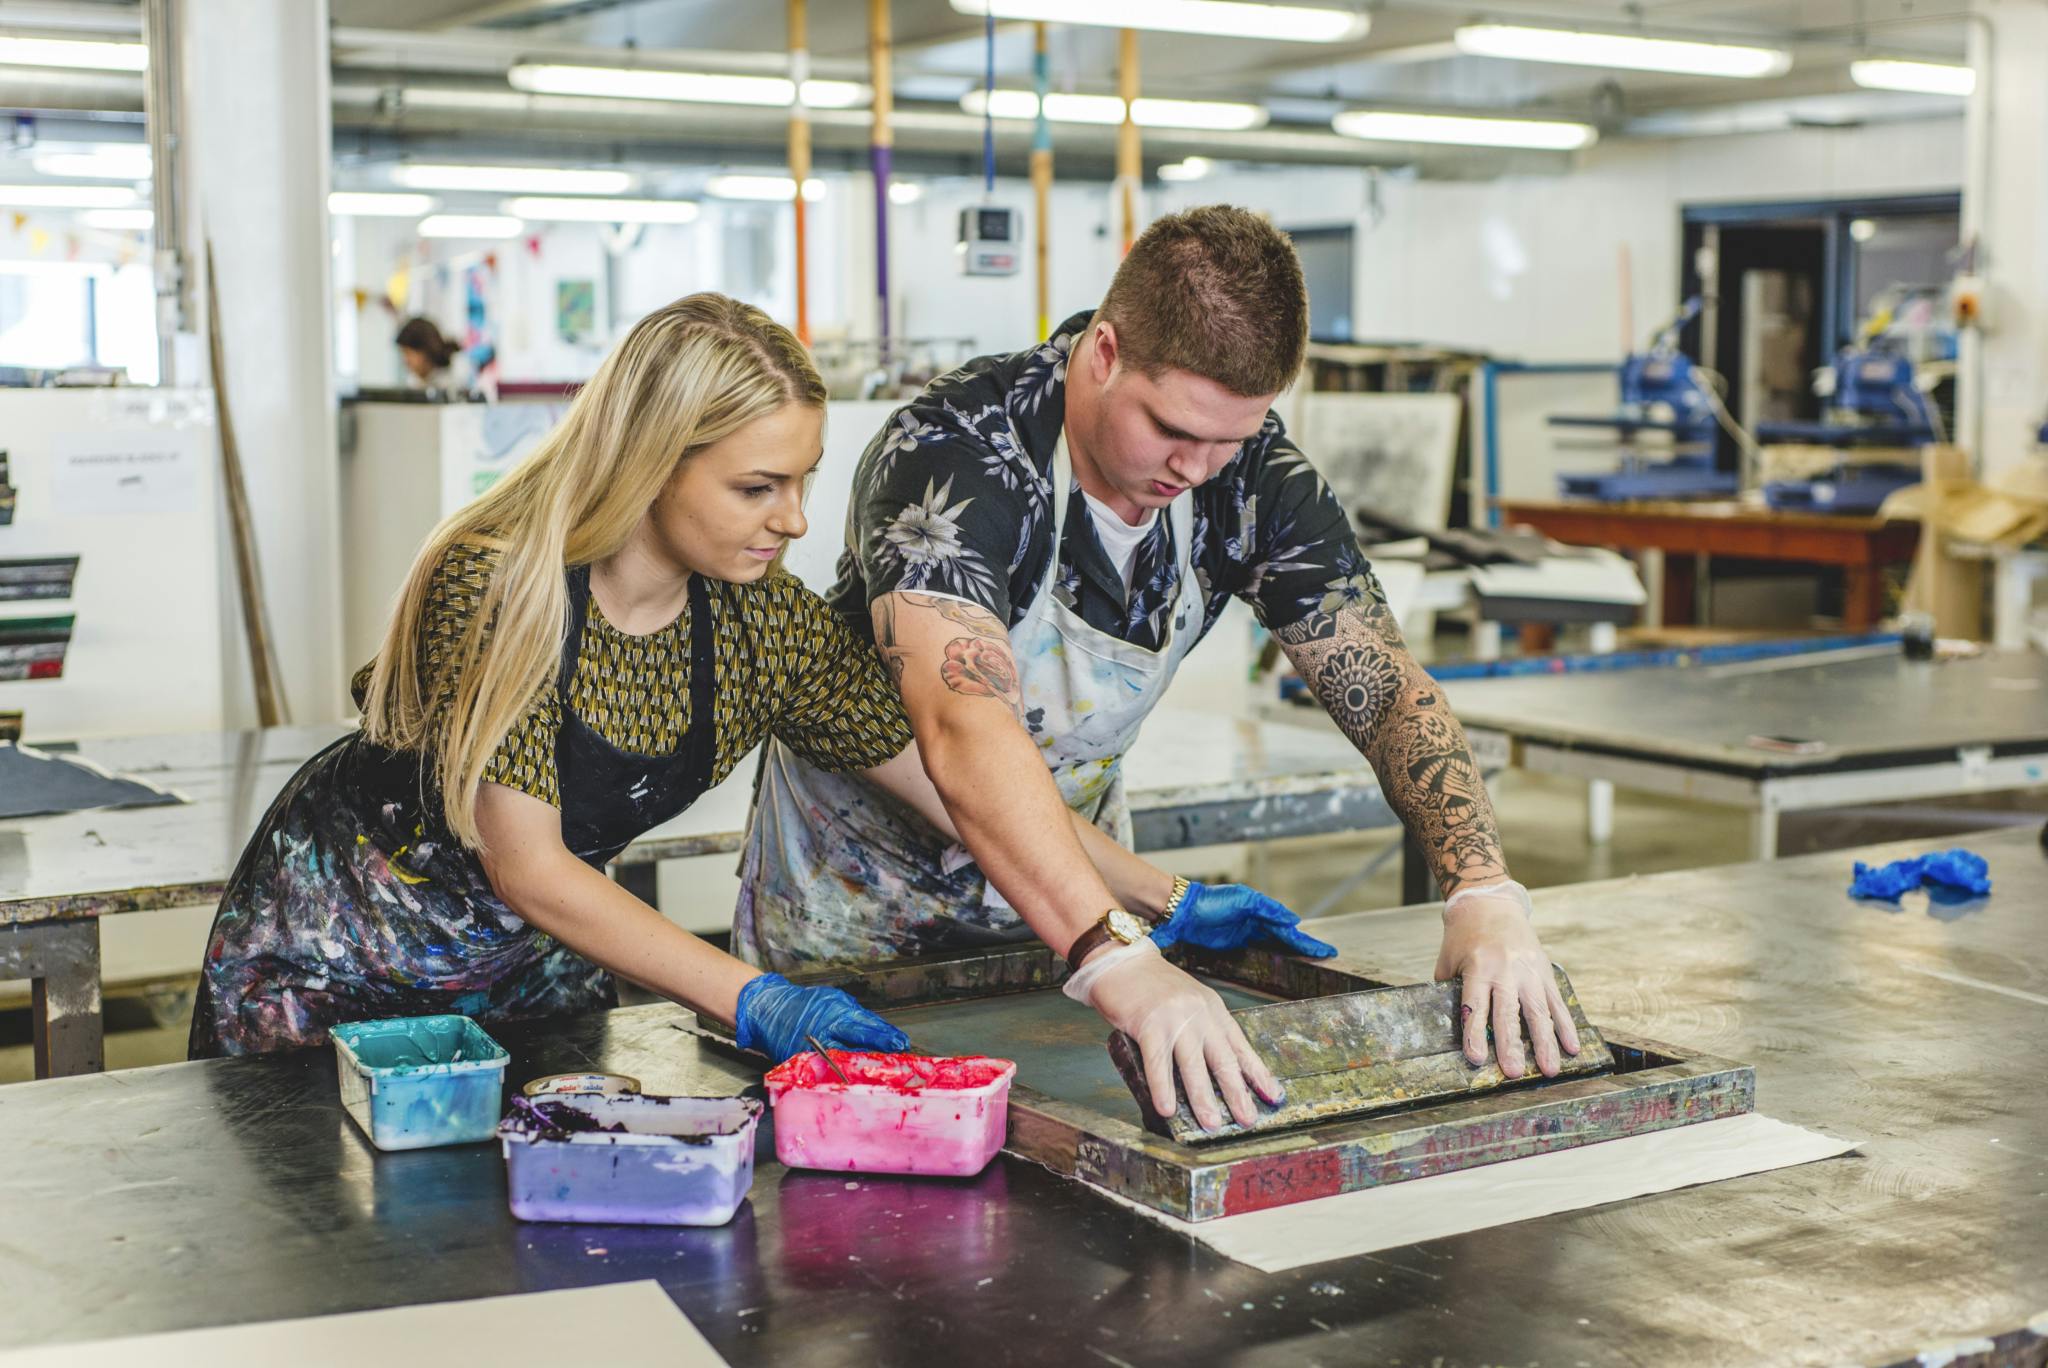 Two students work together to screen print